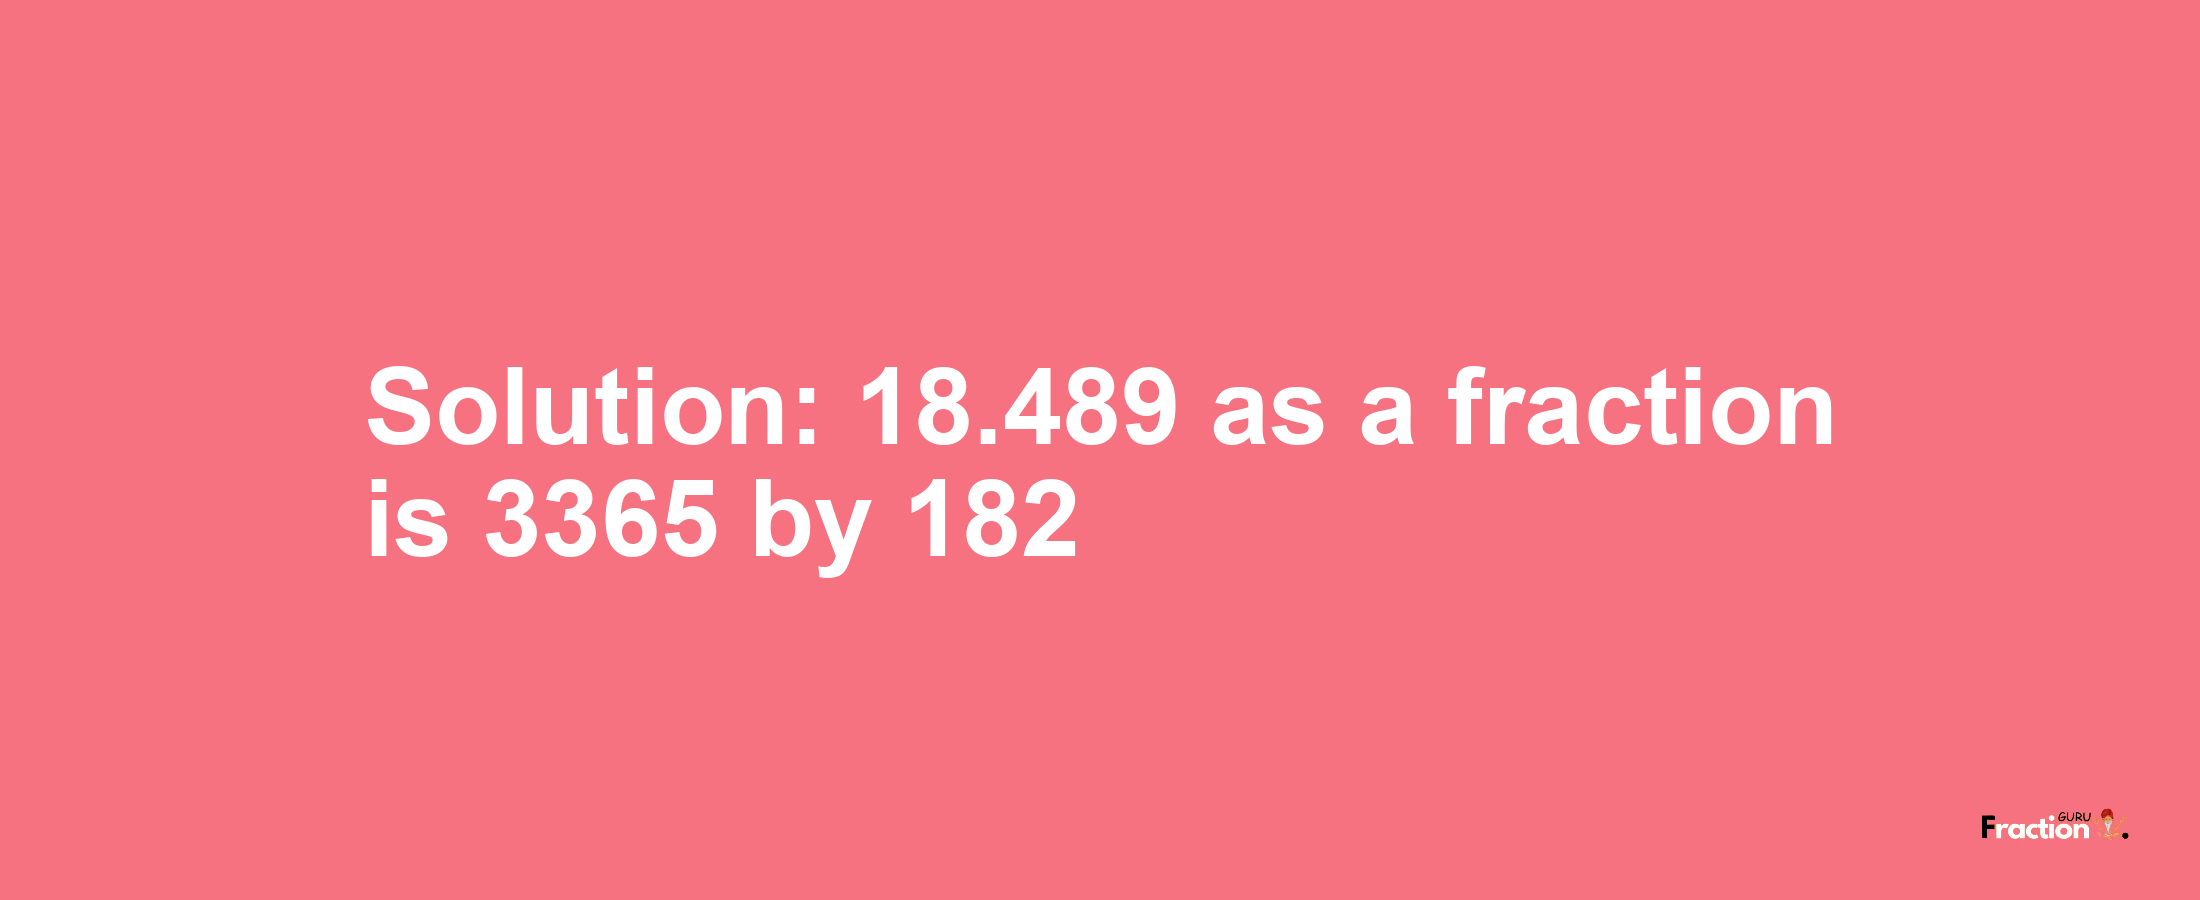 Solution:18.489 as a fraction is 3365/182